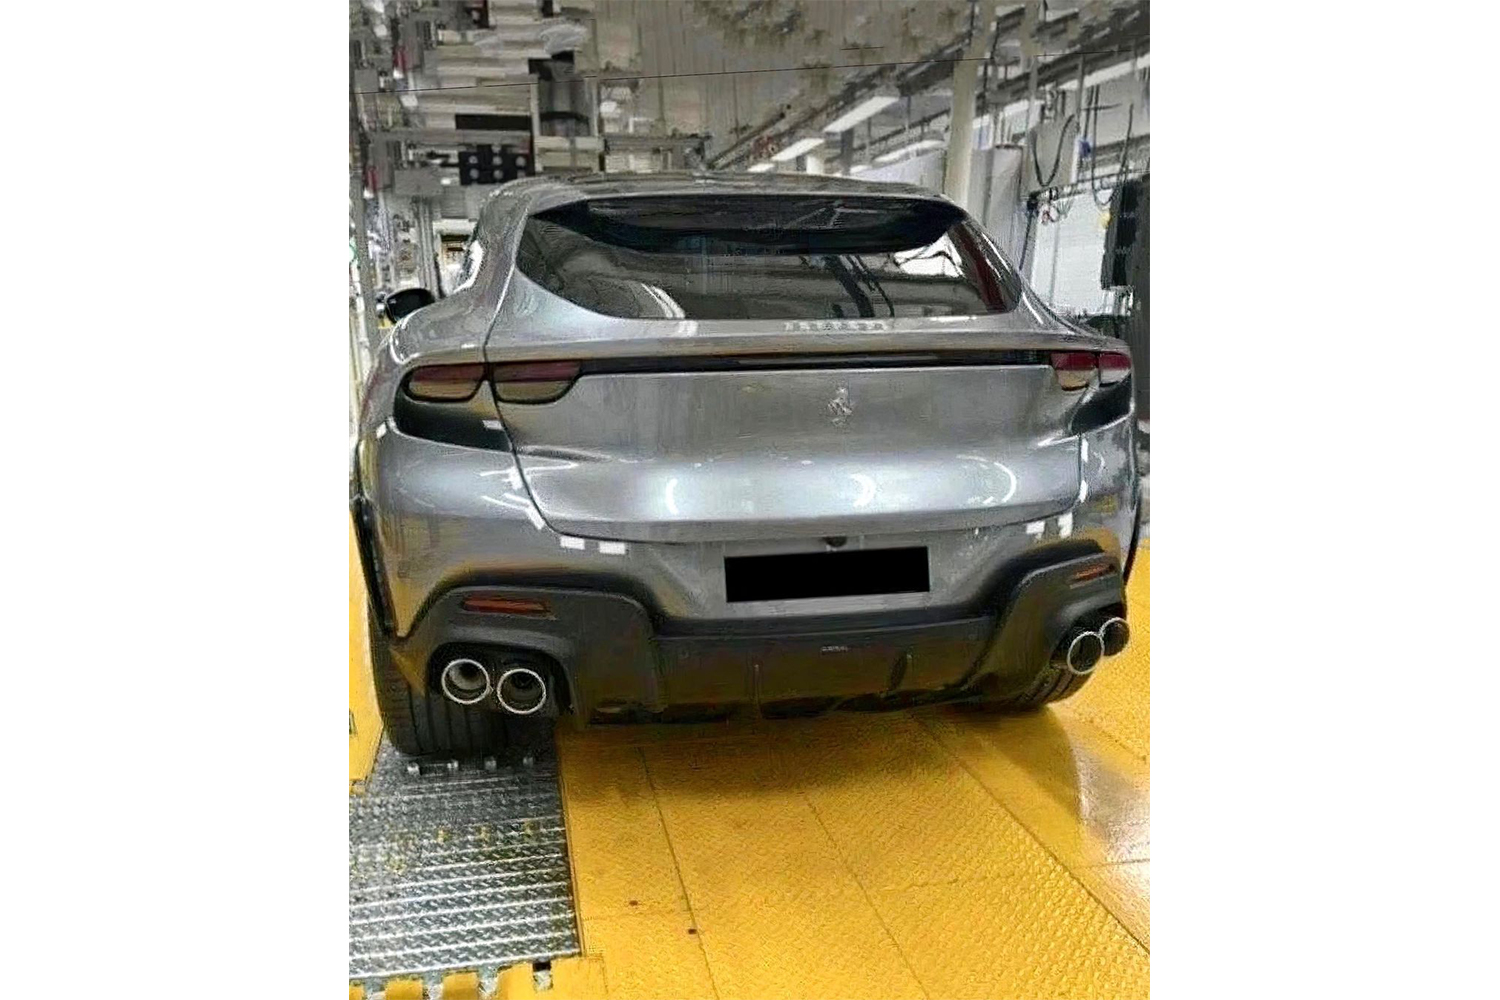 A leaked photo supposedly showing the rear end of the Ferrari Purosangue SUV, the first sport utility vehicle from the luxury Italian marque